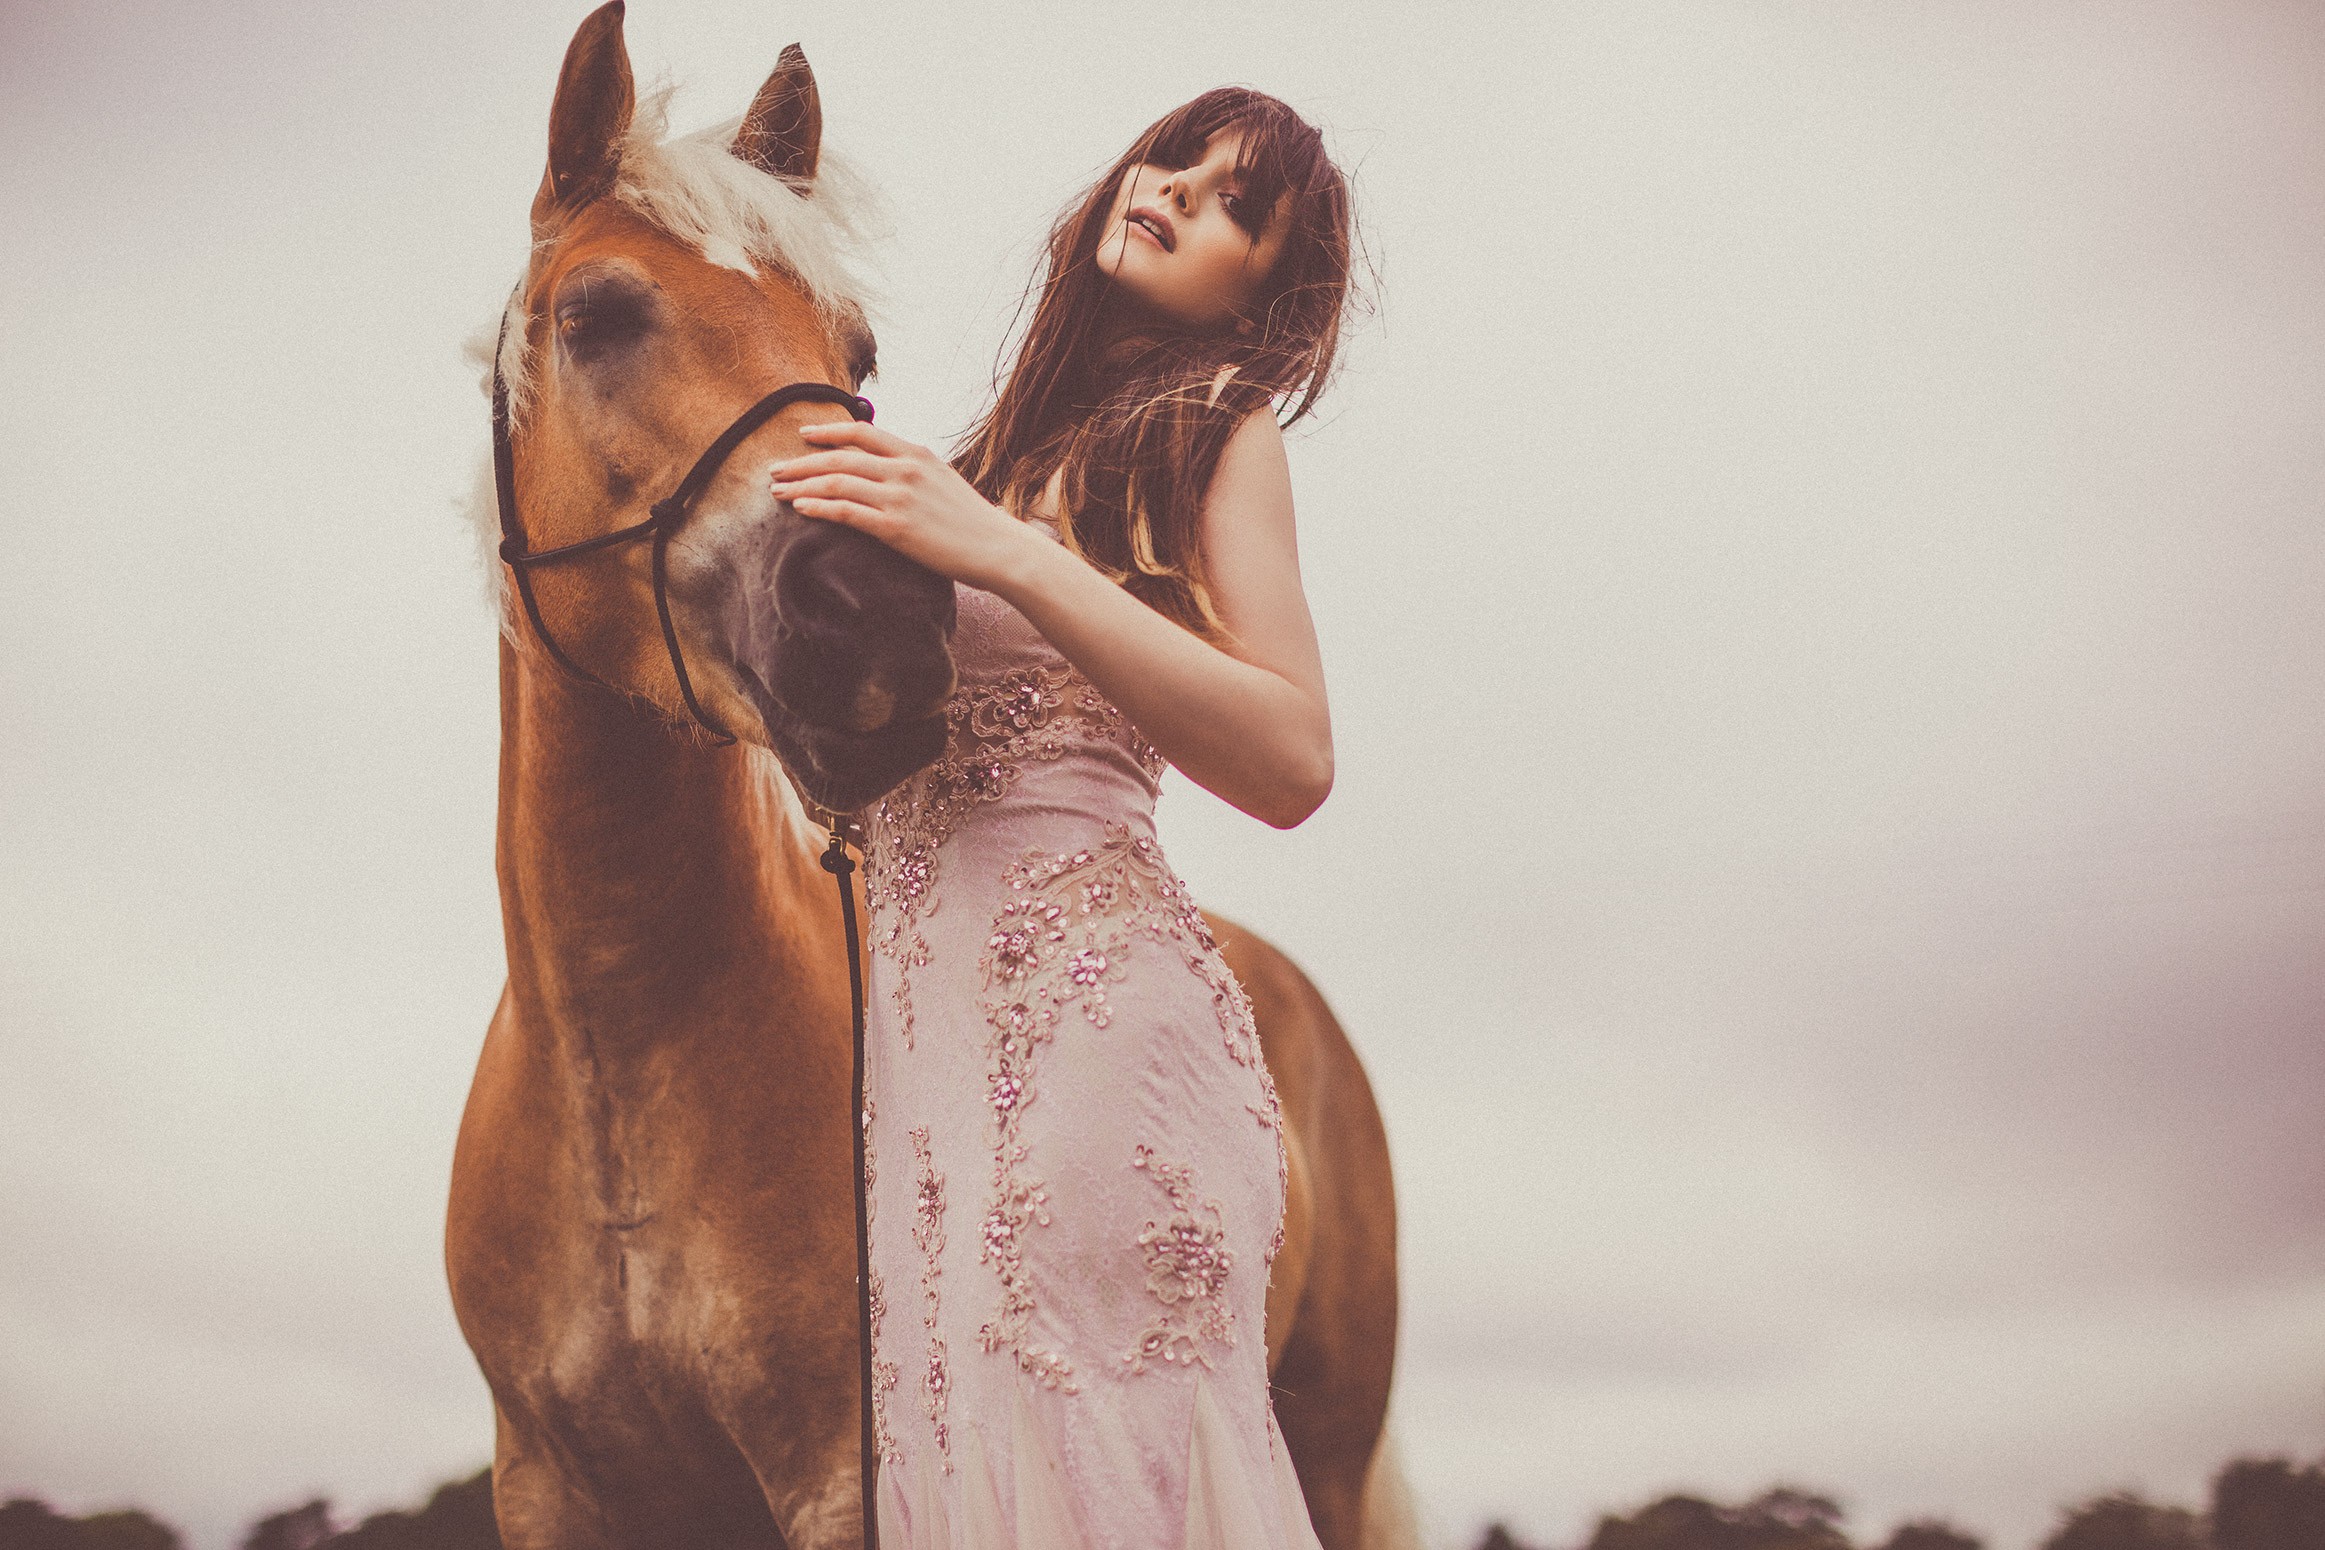 lilah-parsons-ruth-rose-horse-field-shoot-fashion-photography-7